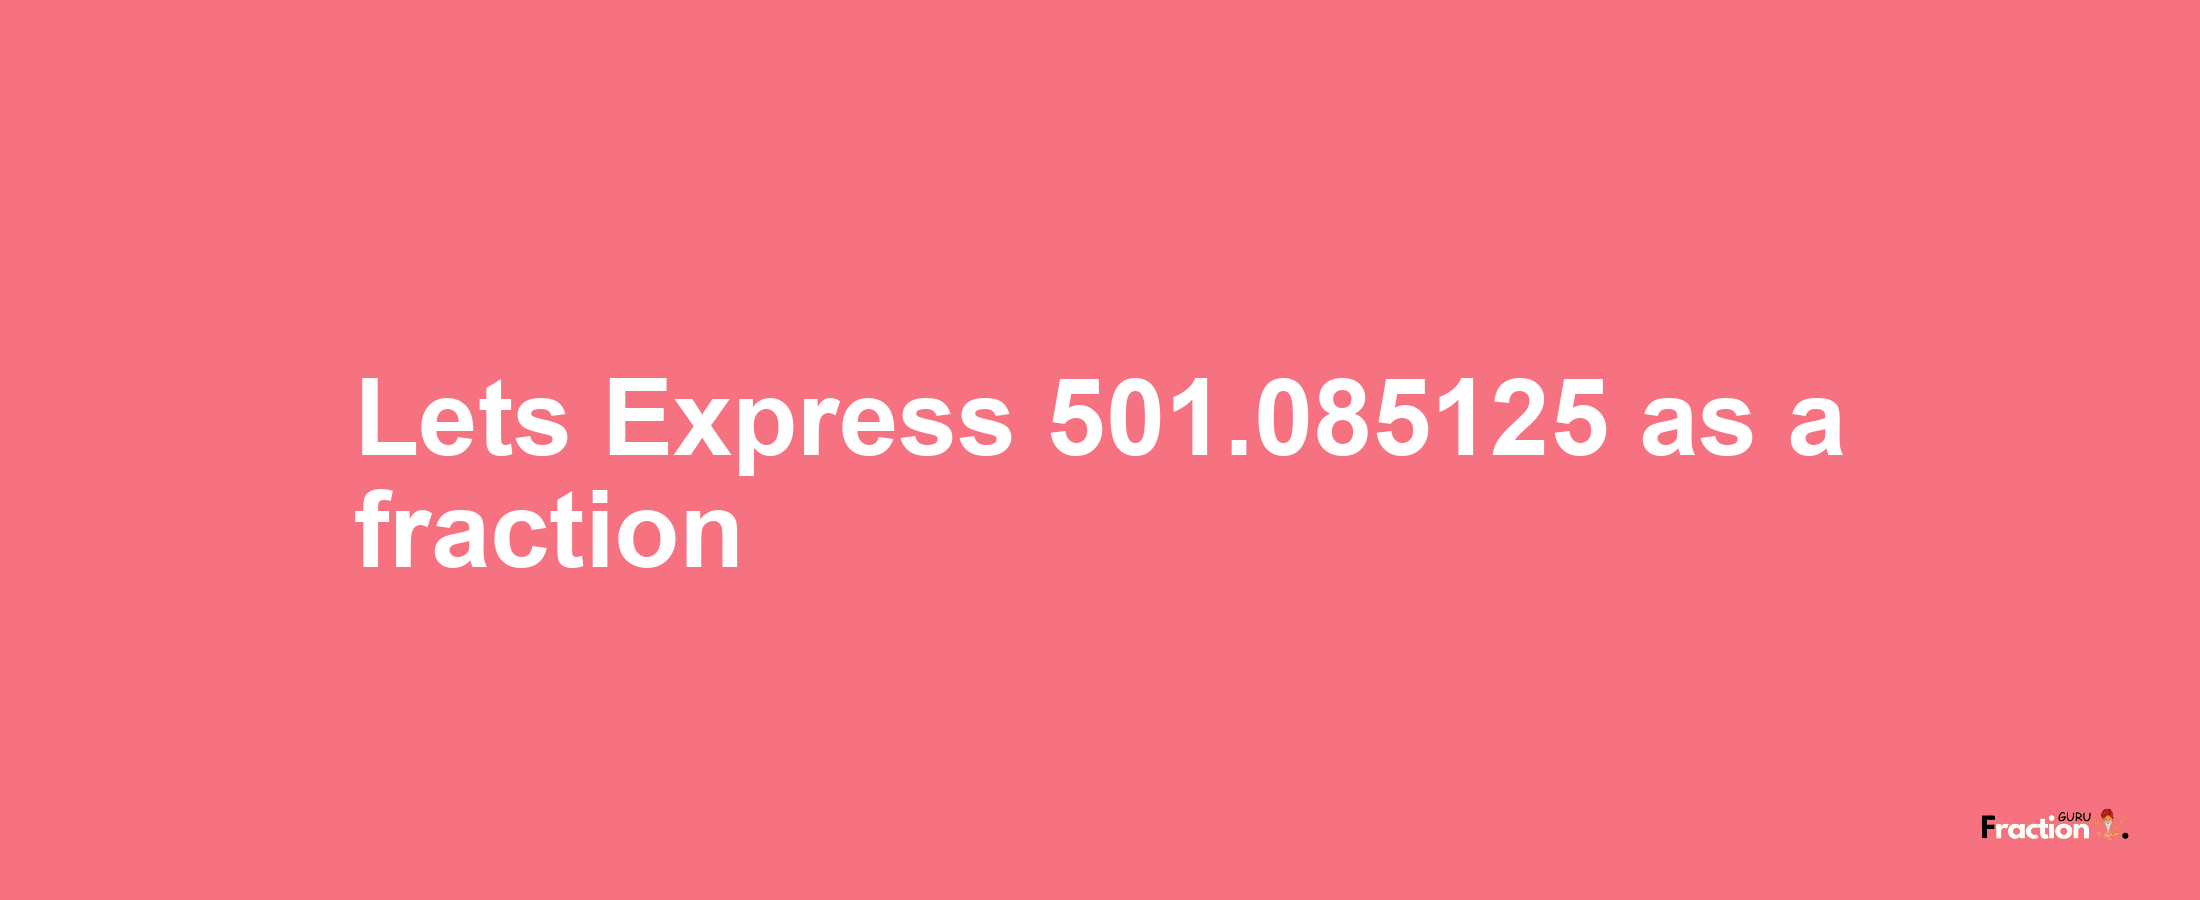 Lets Express 501.085125 as afraction